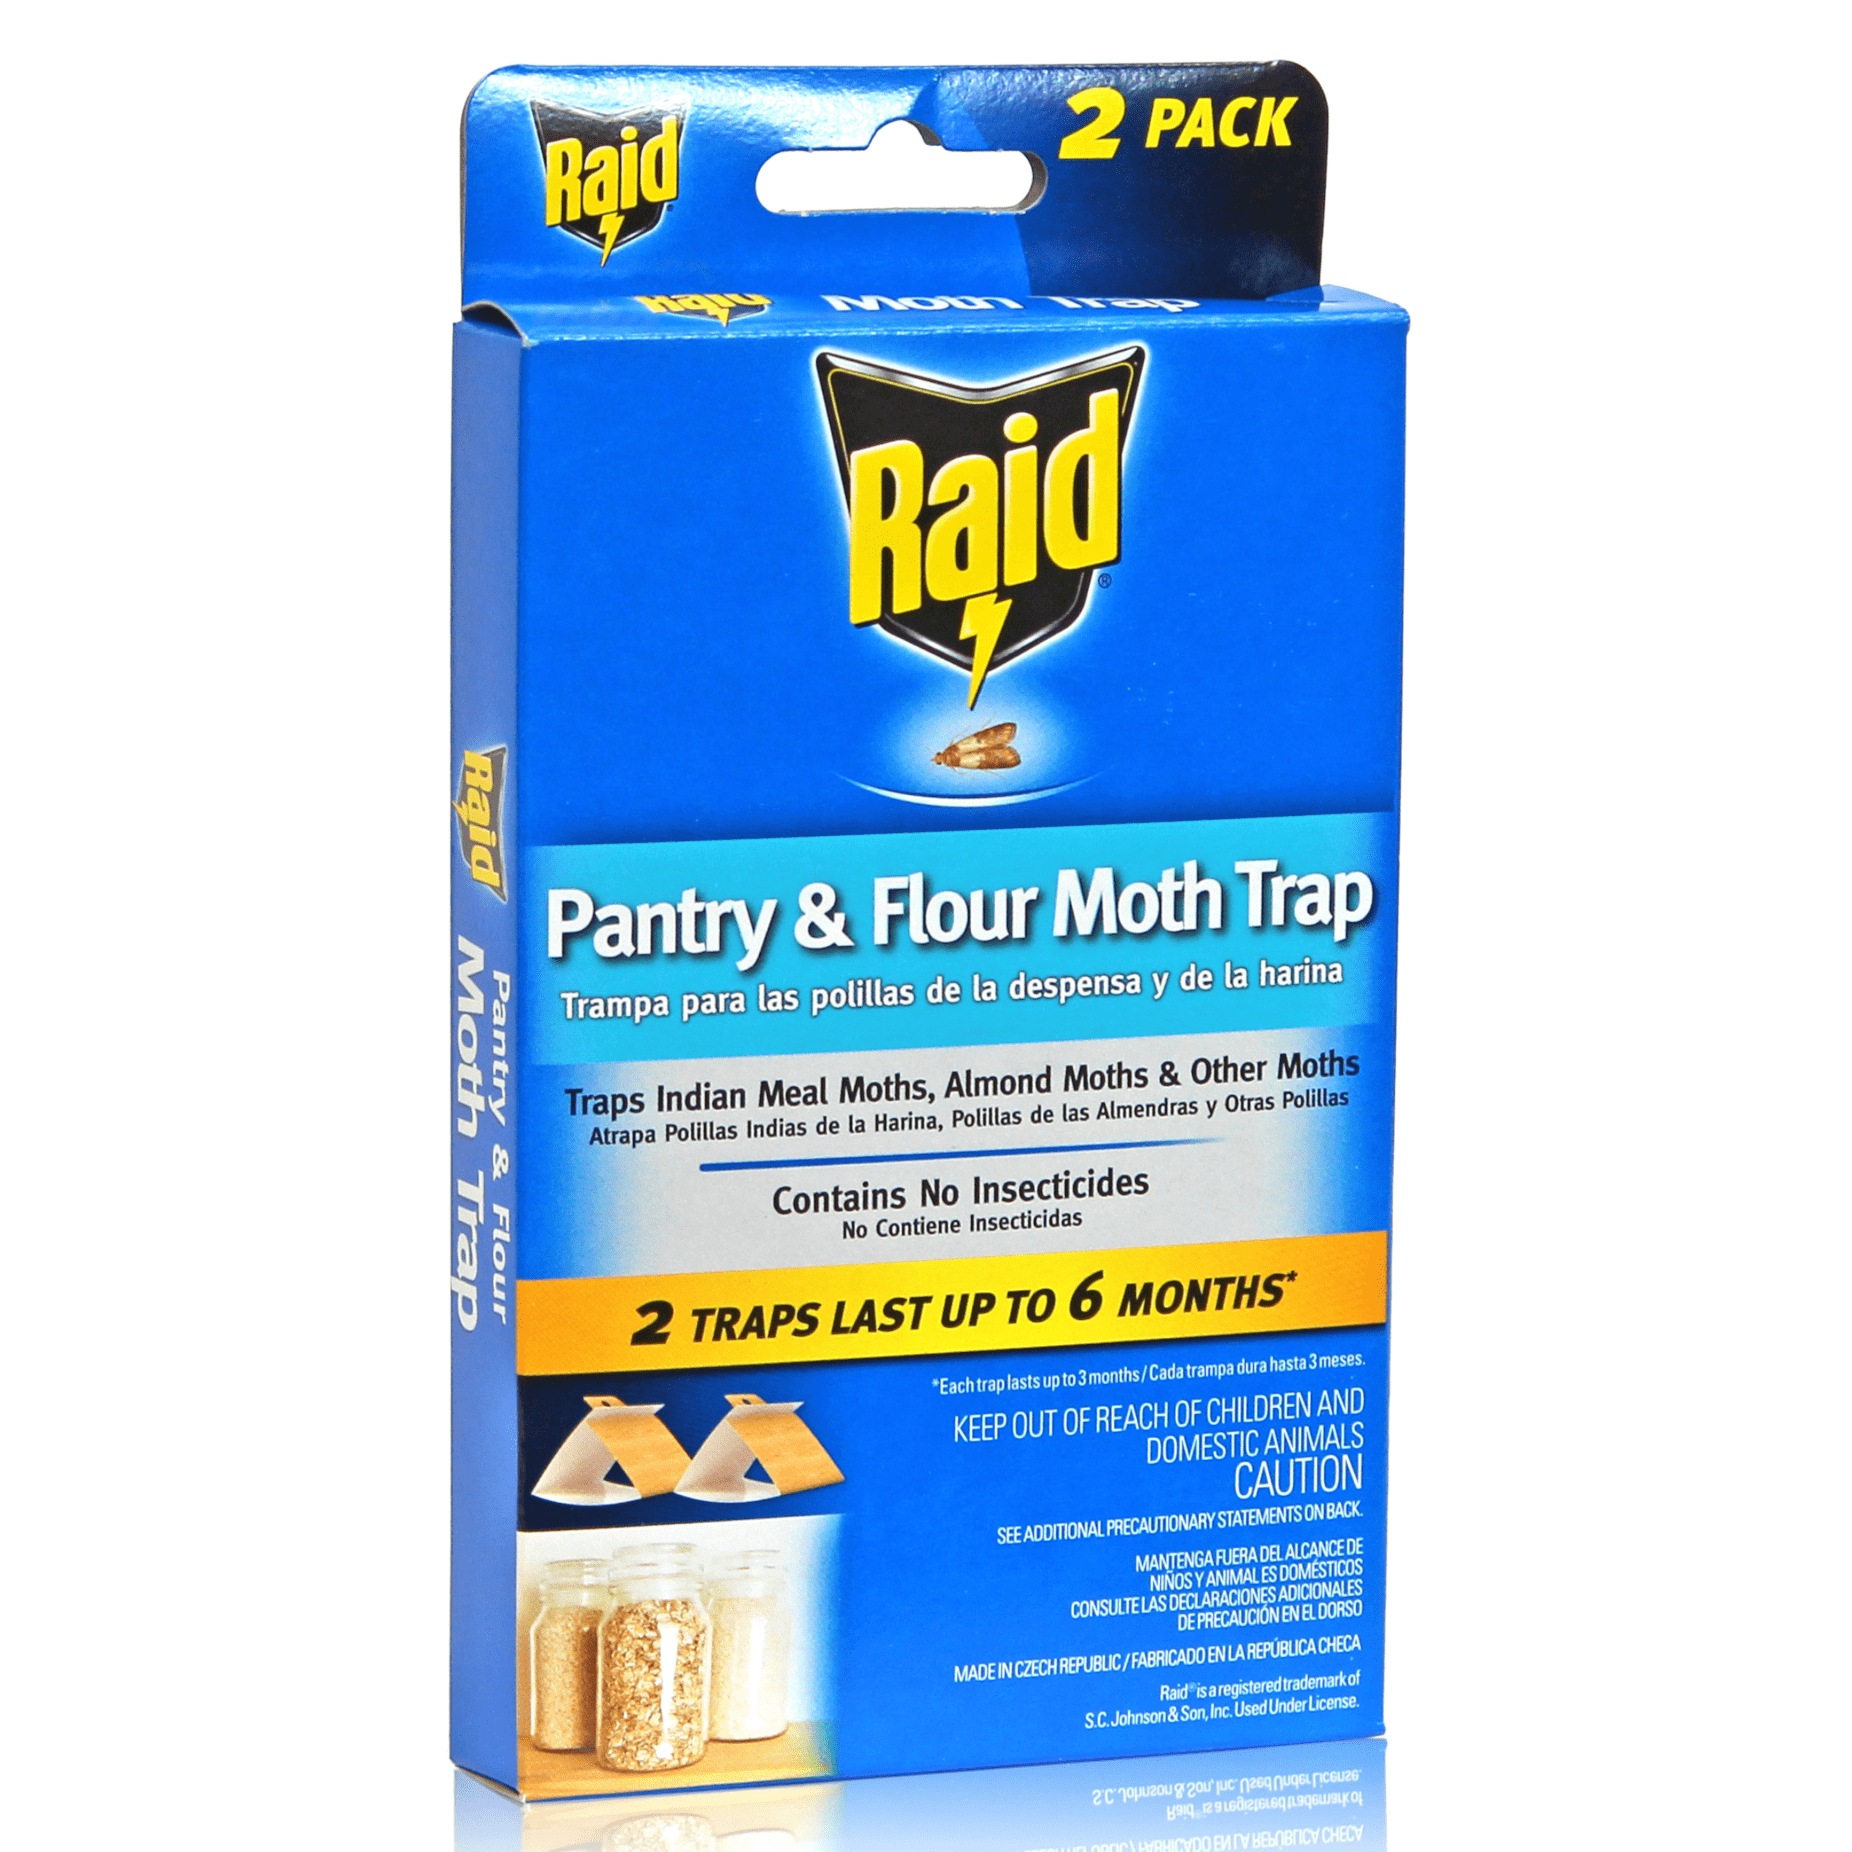 Powerful Pantry Moth Traps 15pk - Versatile and Effective | Results  Guaranteed